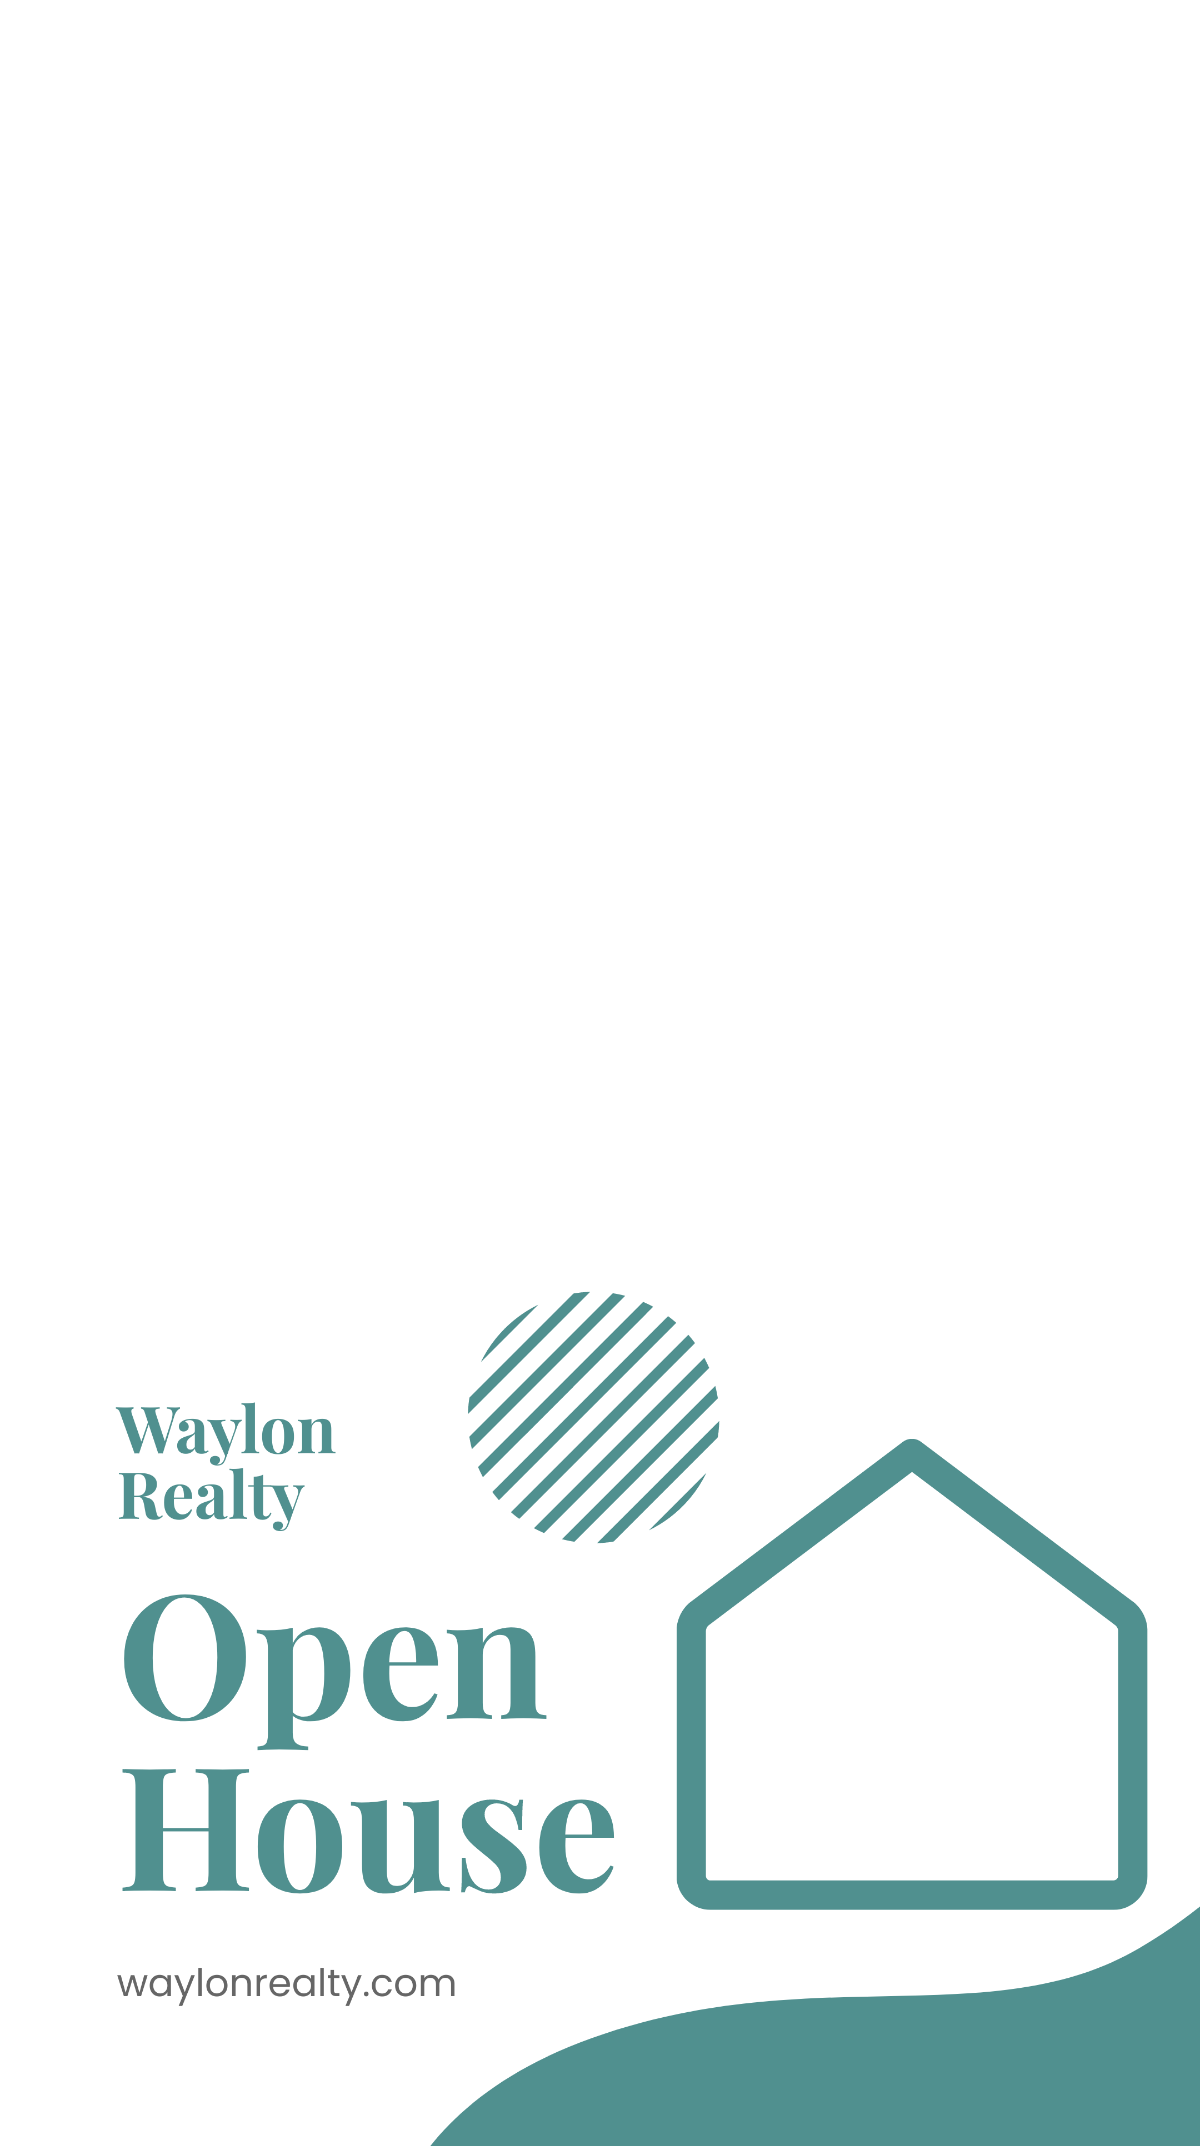 Free Realtor Open House Snapchat Geofilter Template